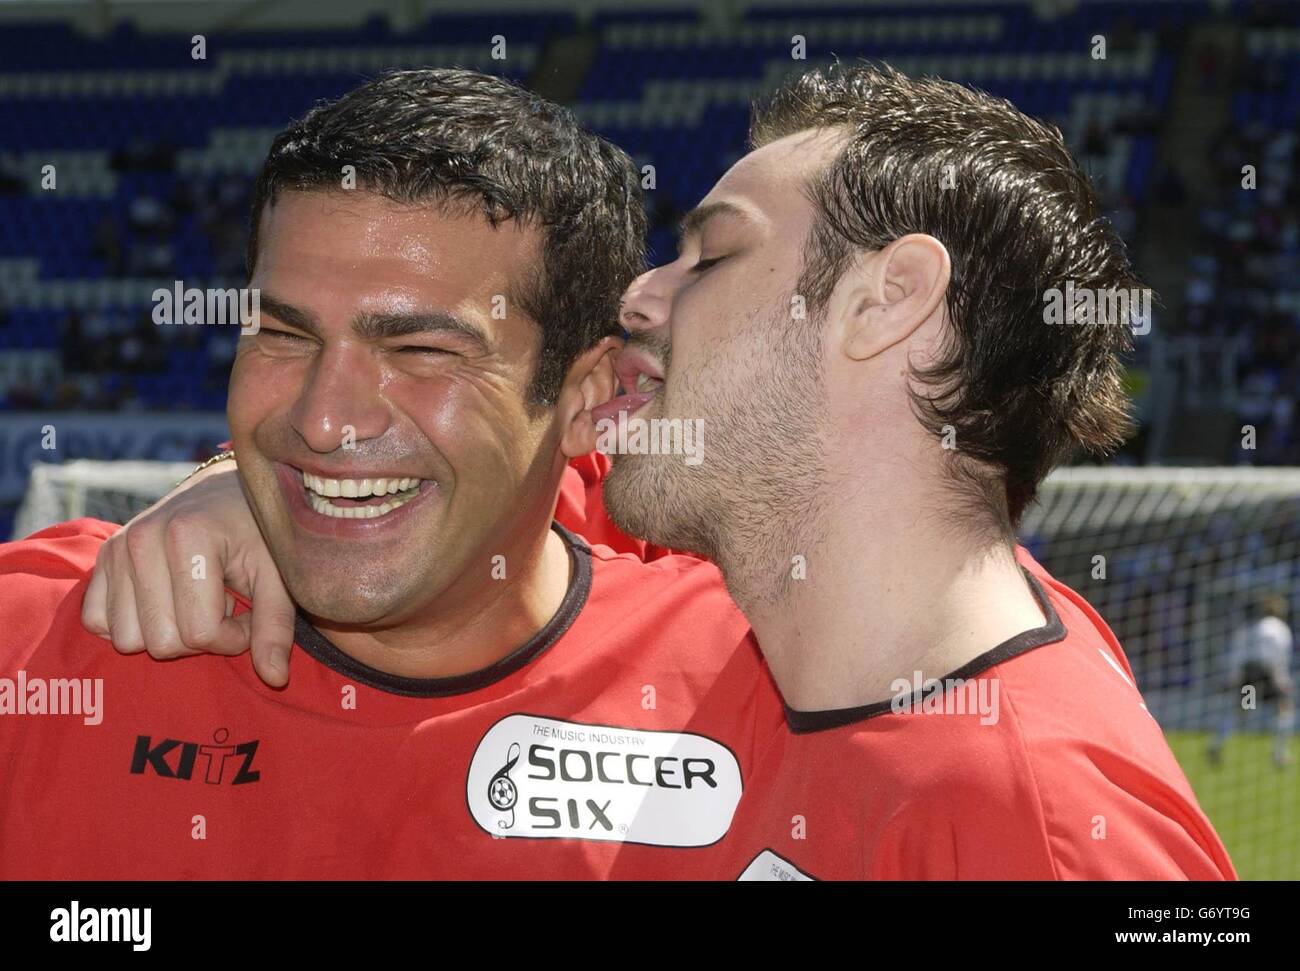 Actors Tamer Hassan (left) and Danny Dyer during the Soccer Six charity football tournament in aid of The Prince's Trust at the Madejski Stadium, home to Reading Football Club in Reading. Stock Photo